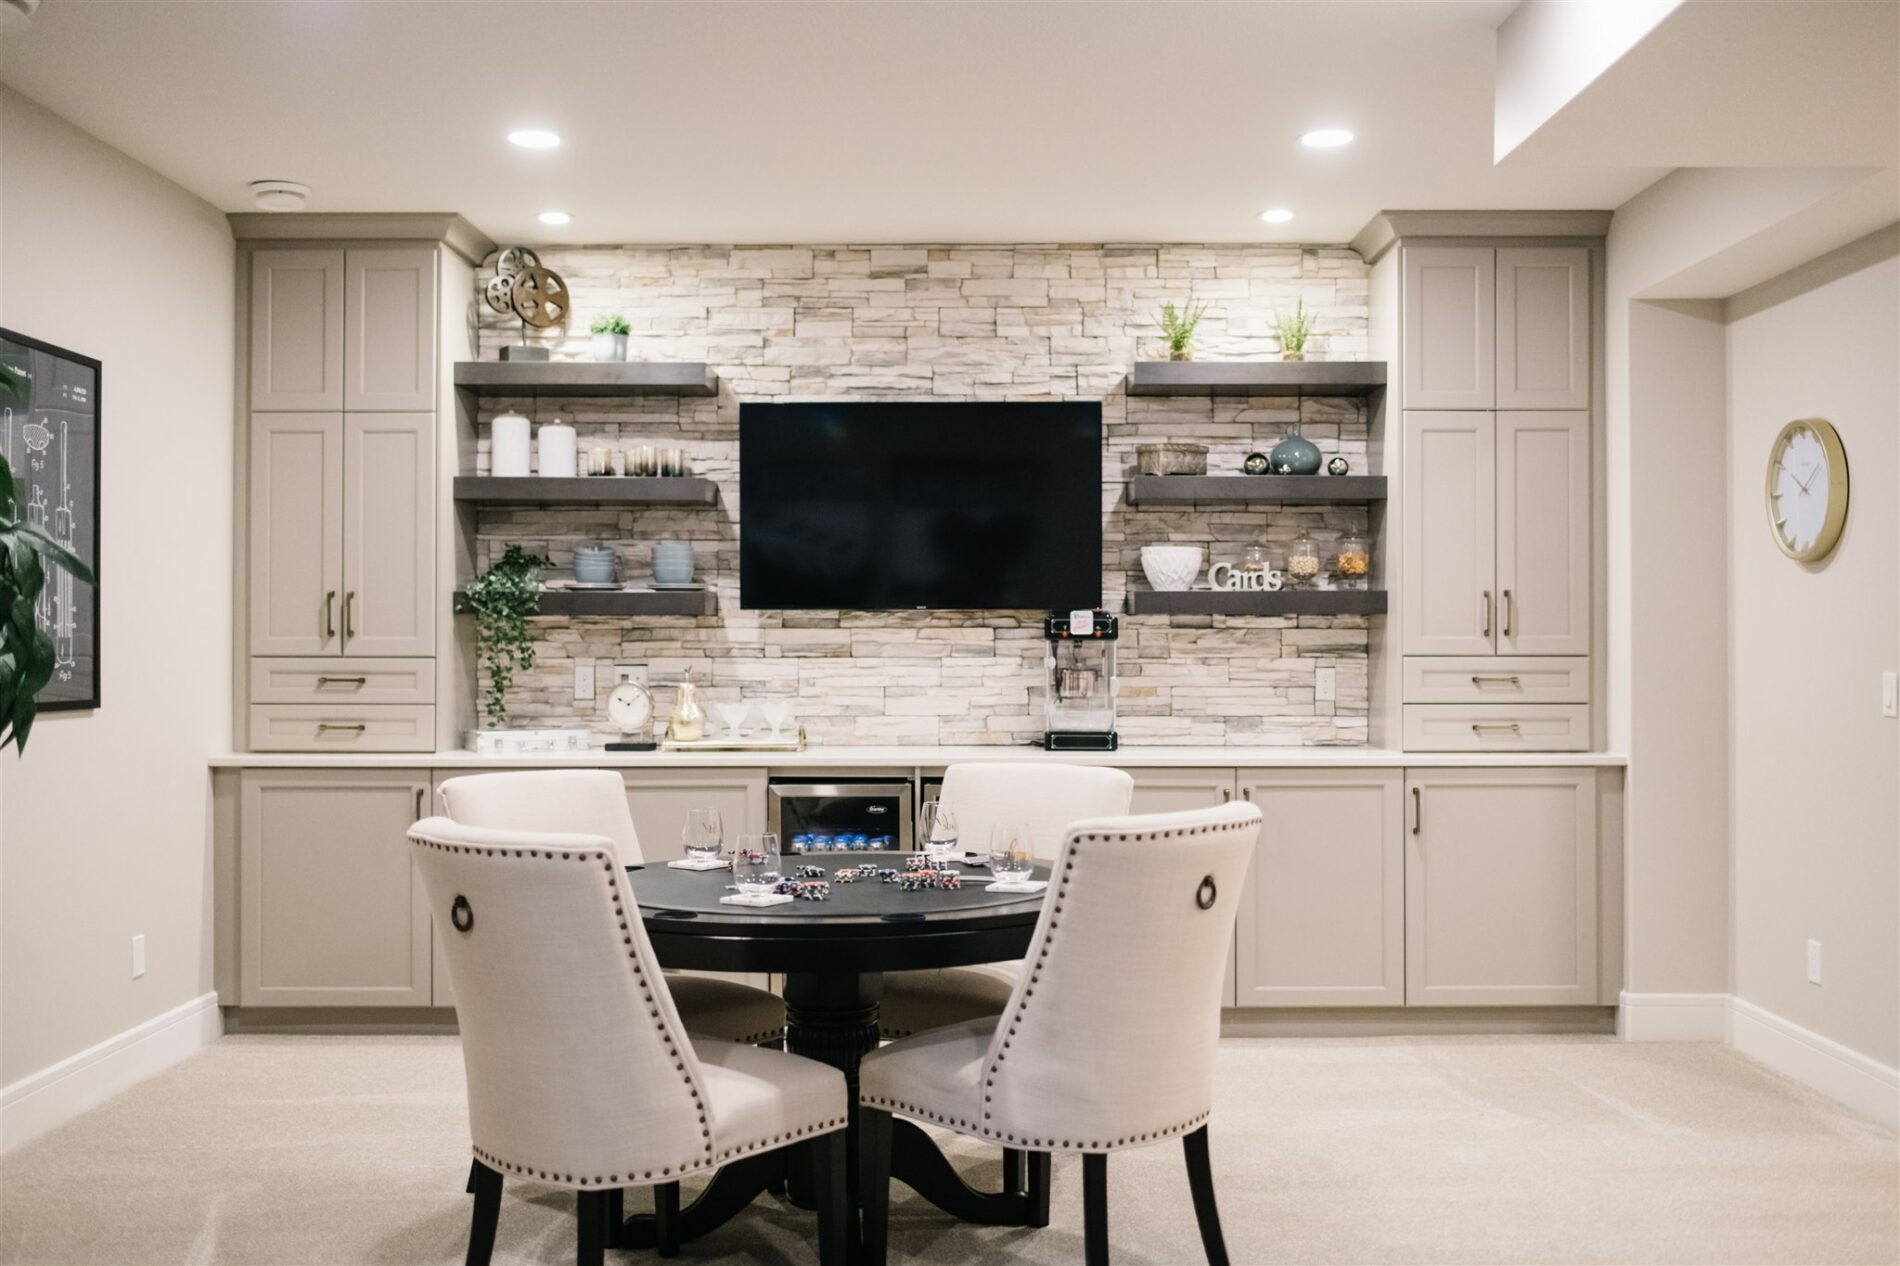 Games table set up in front of dry bar in basement of the Julian showhome with light beige cabinetry, stone feature wall and floating shelves infront